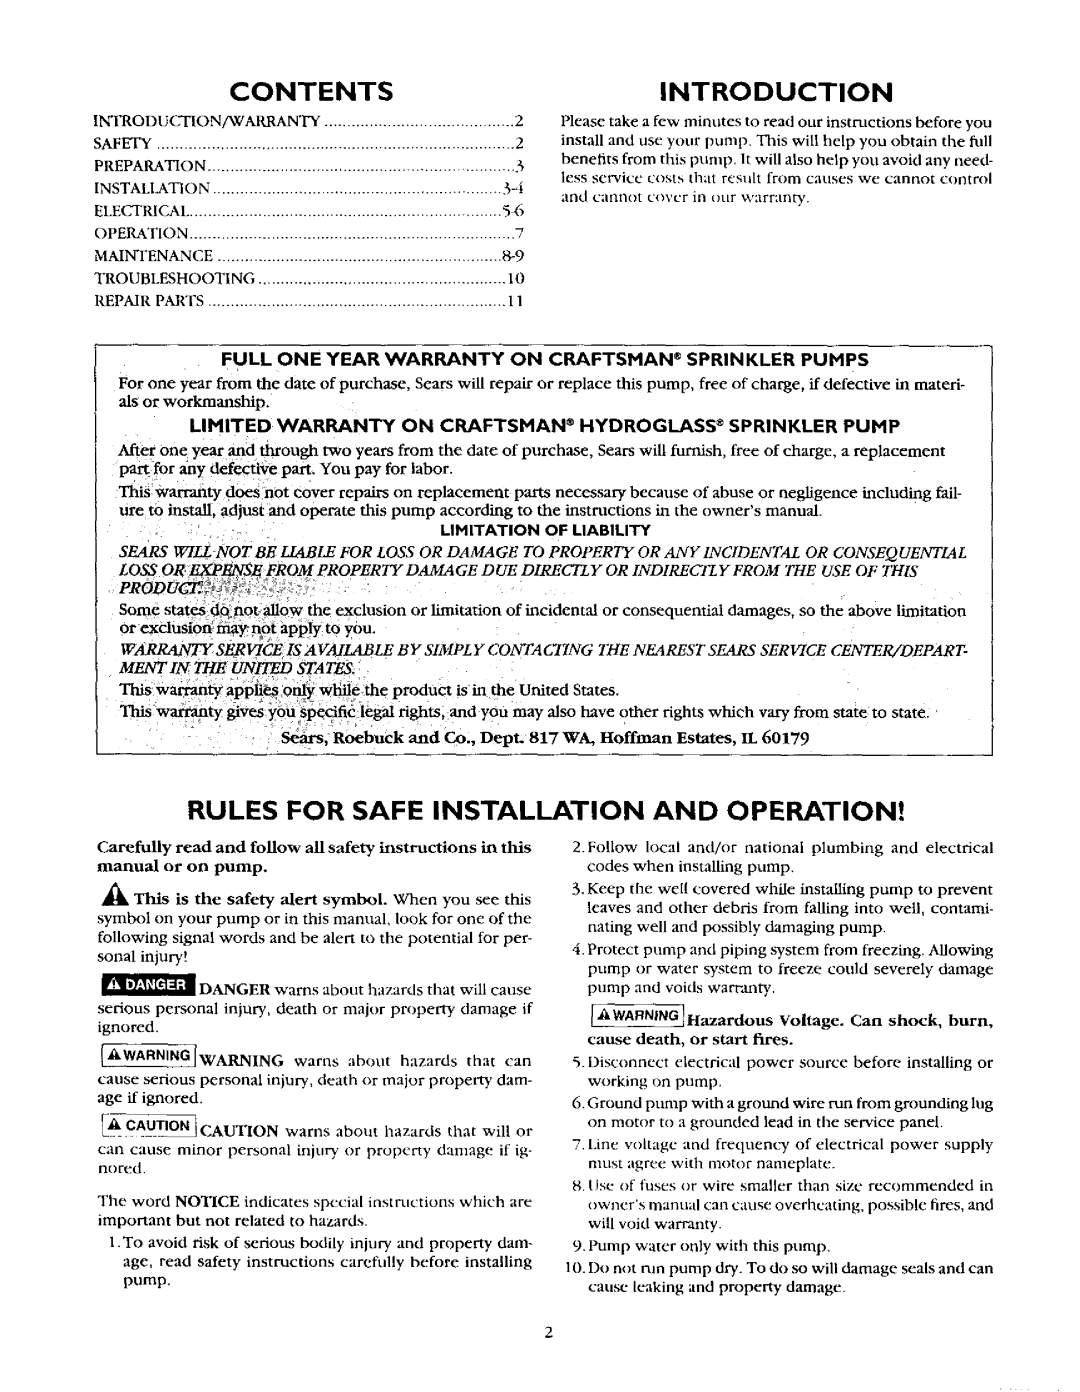 Craftsman 390.262553, 390.262653, 390.262454 owner manual Contentsintroduction, Rules For Safe Installation And Operation 